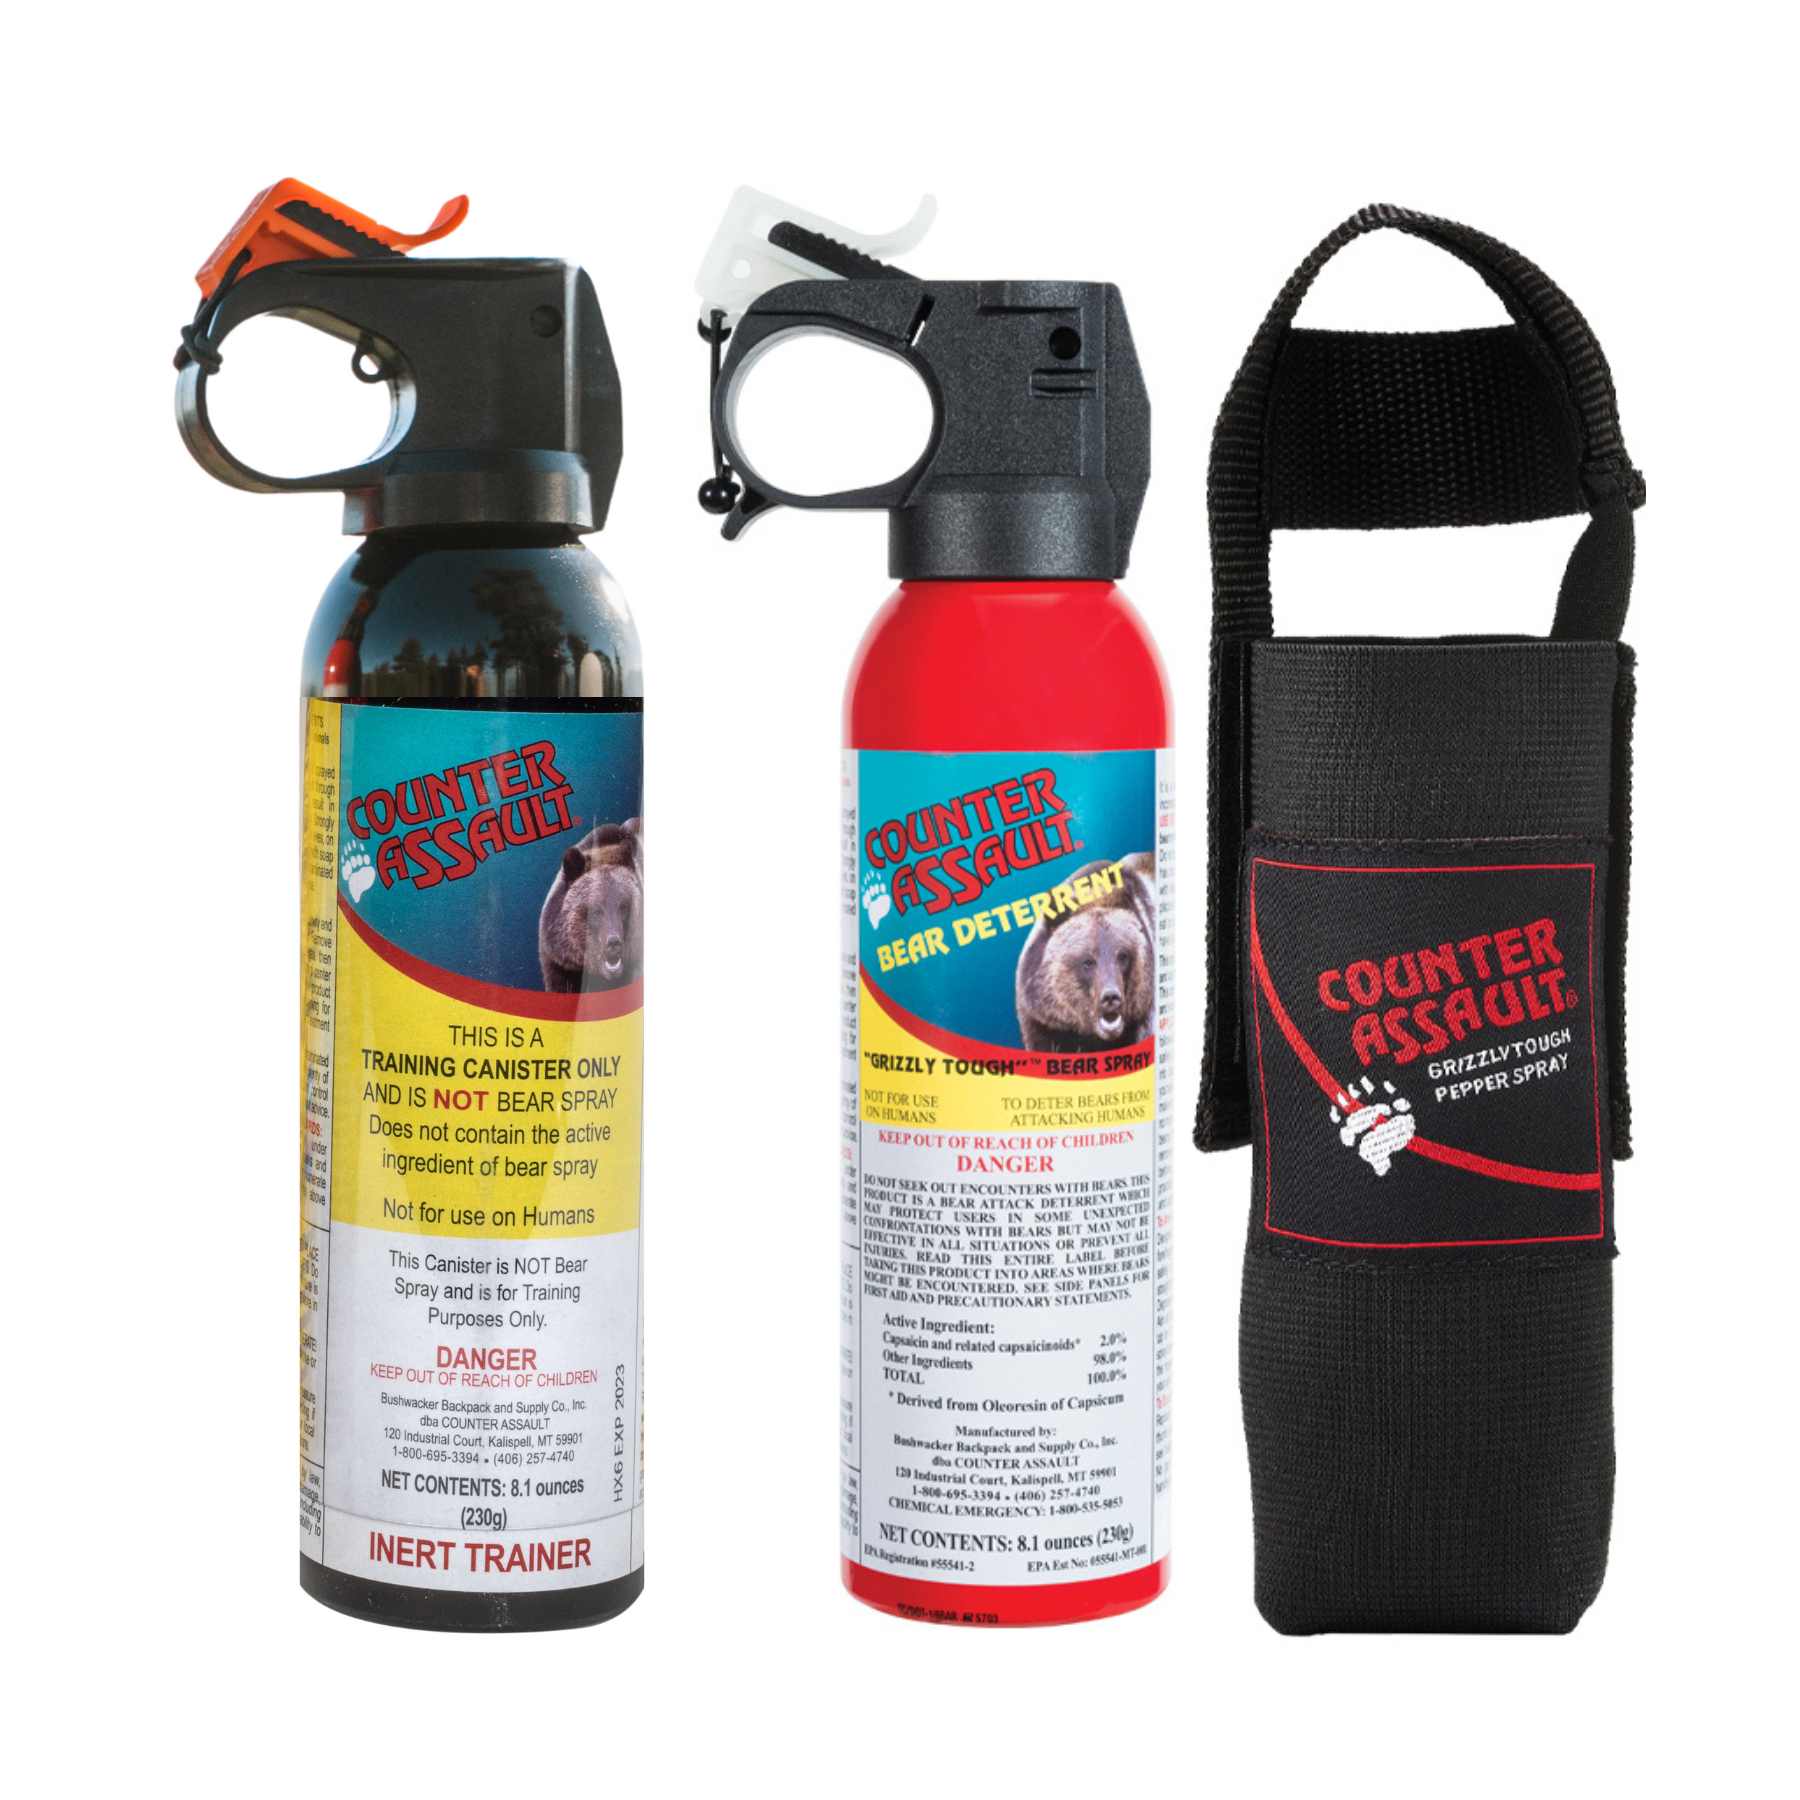 A training canister and a Counter Assault bear deterrent spray with holster